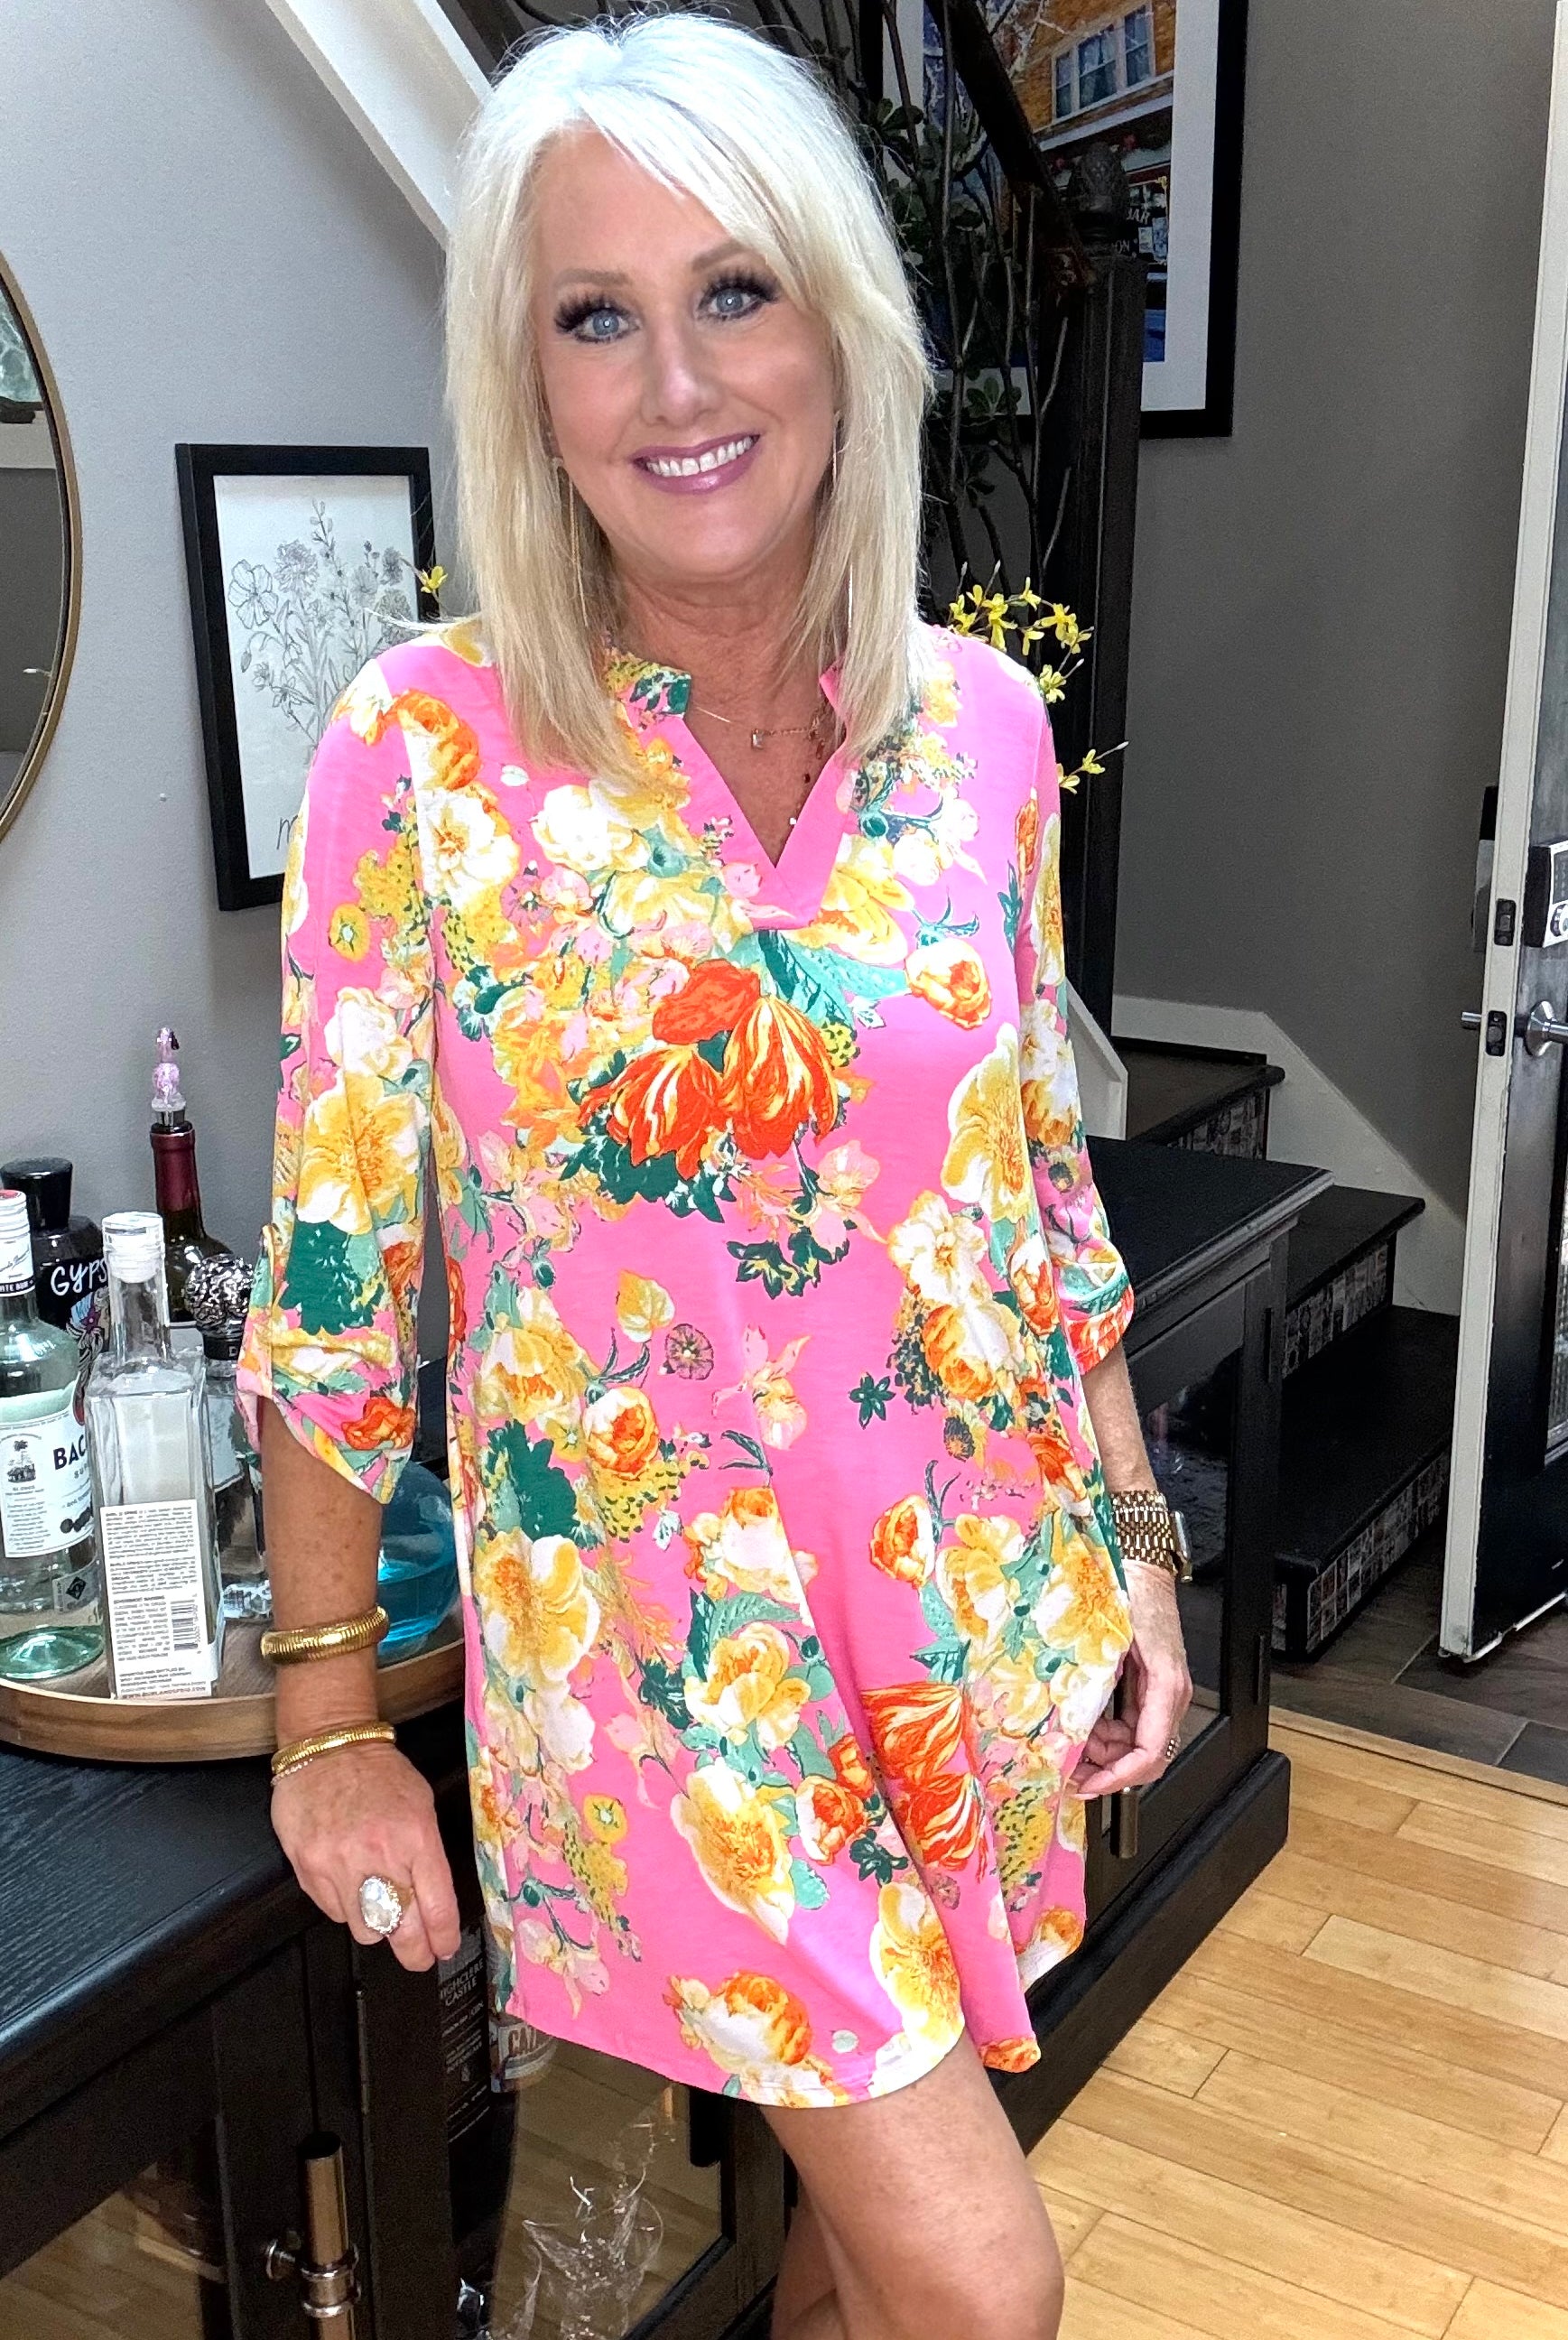 Lizzy Dress in Hot Pink and Yellow Floral-Dresses-Ave Shops-Urban Threadz Boutique, Women's Fashion Boutique in Saugatuck, MI